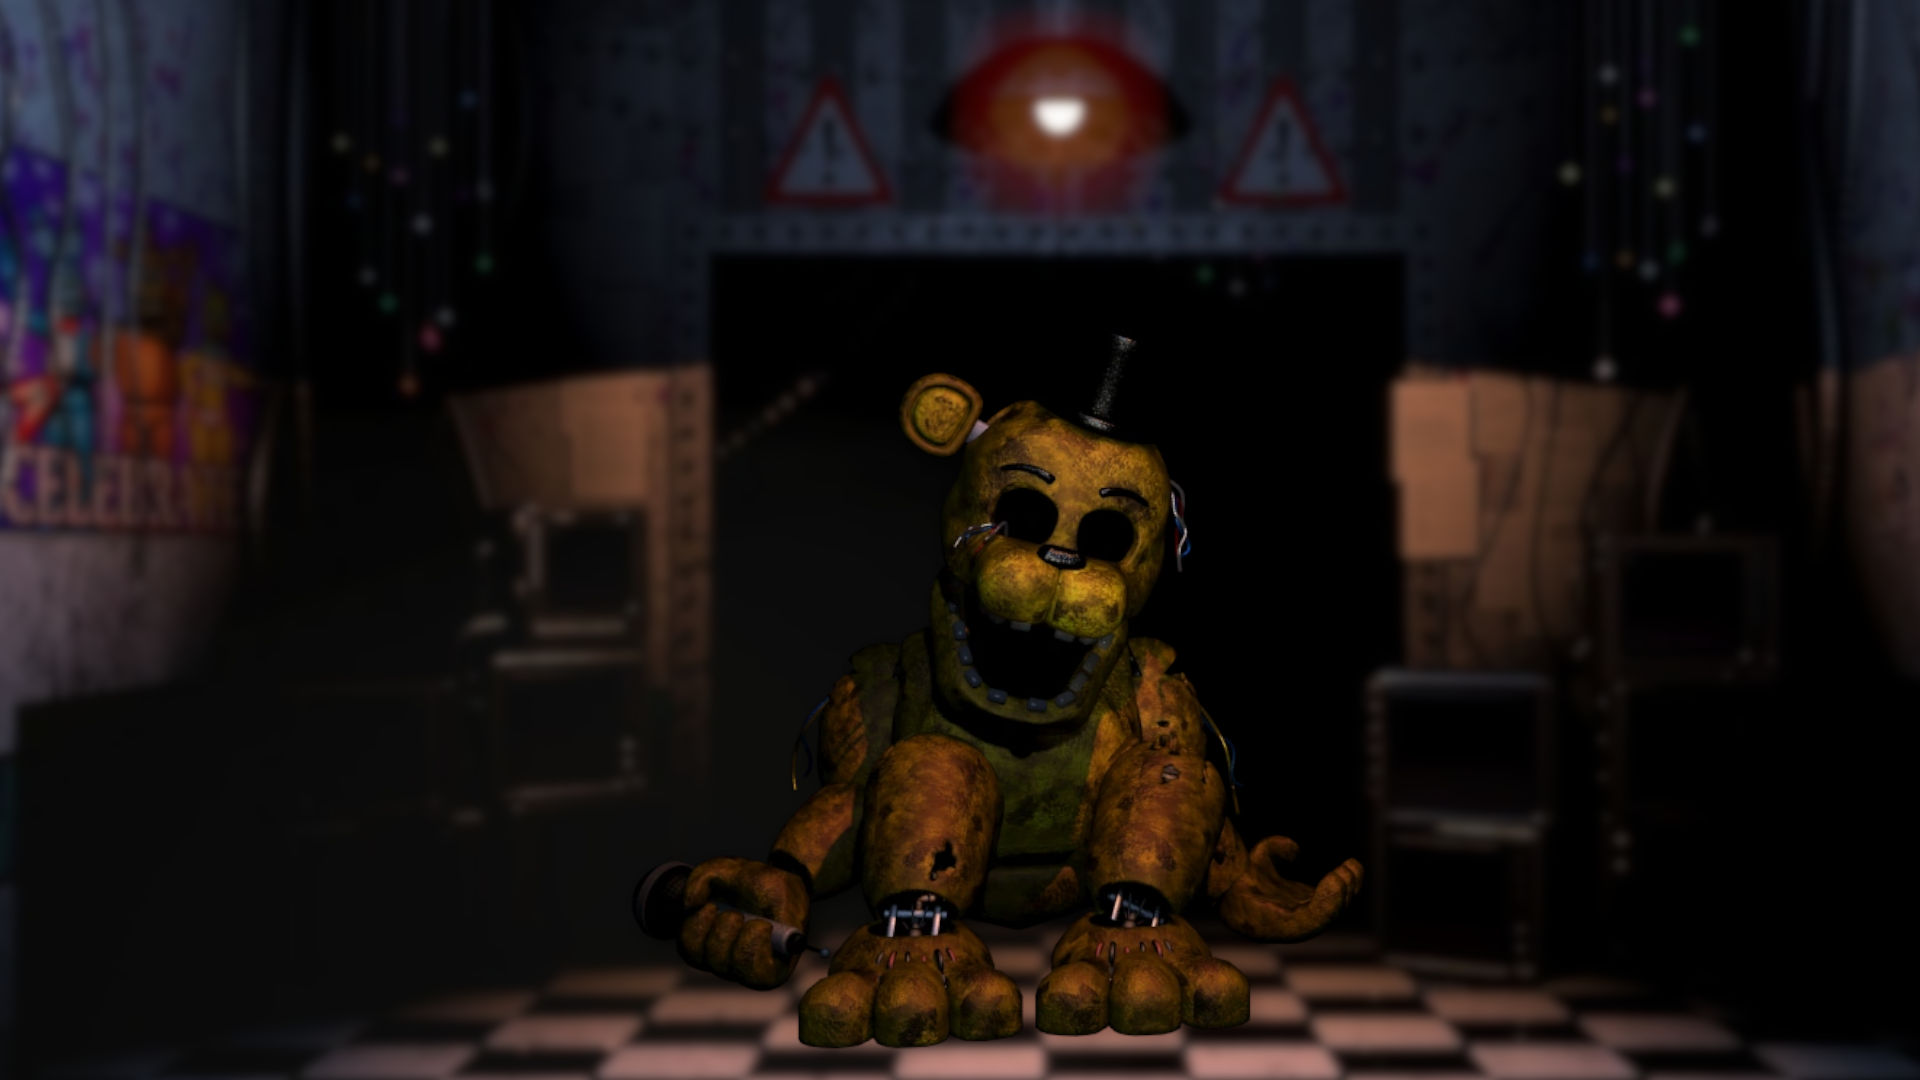 Nightmare Golden Freddy (Five Nights at Freddy's) HD Wallpapers